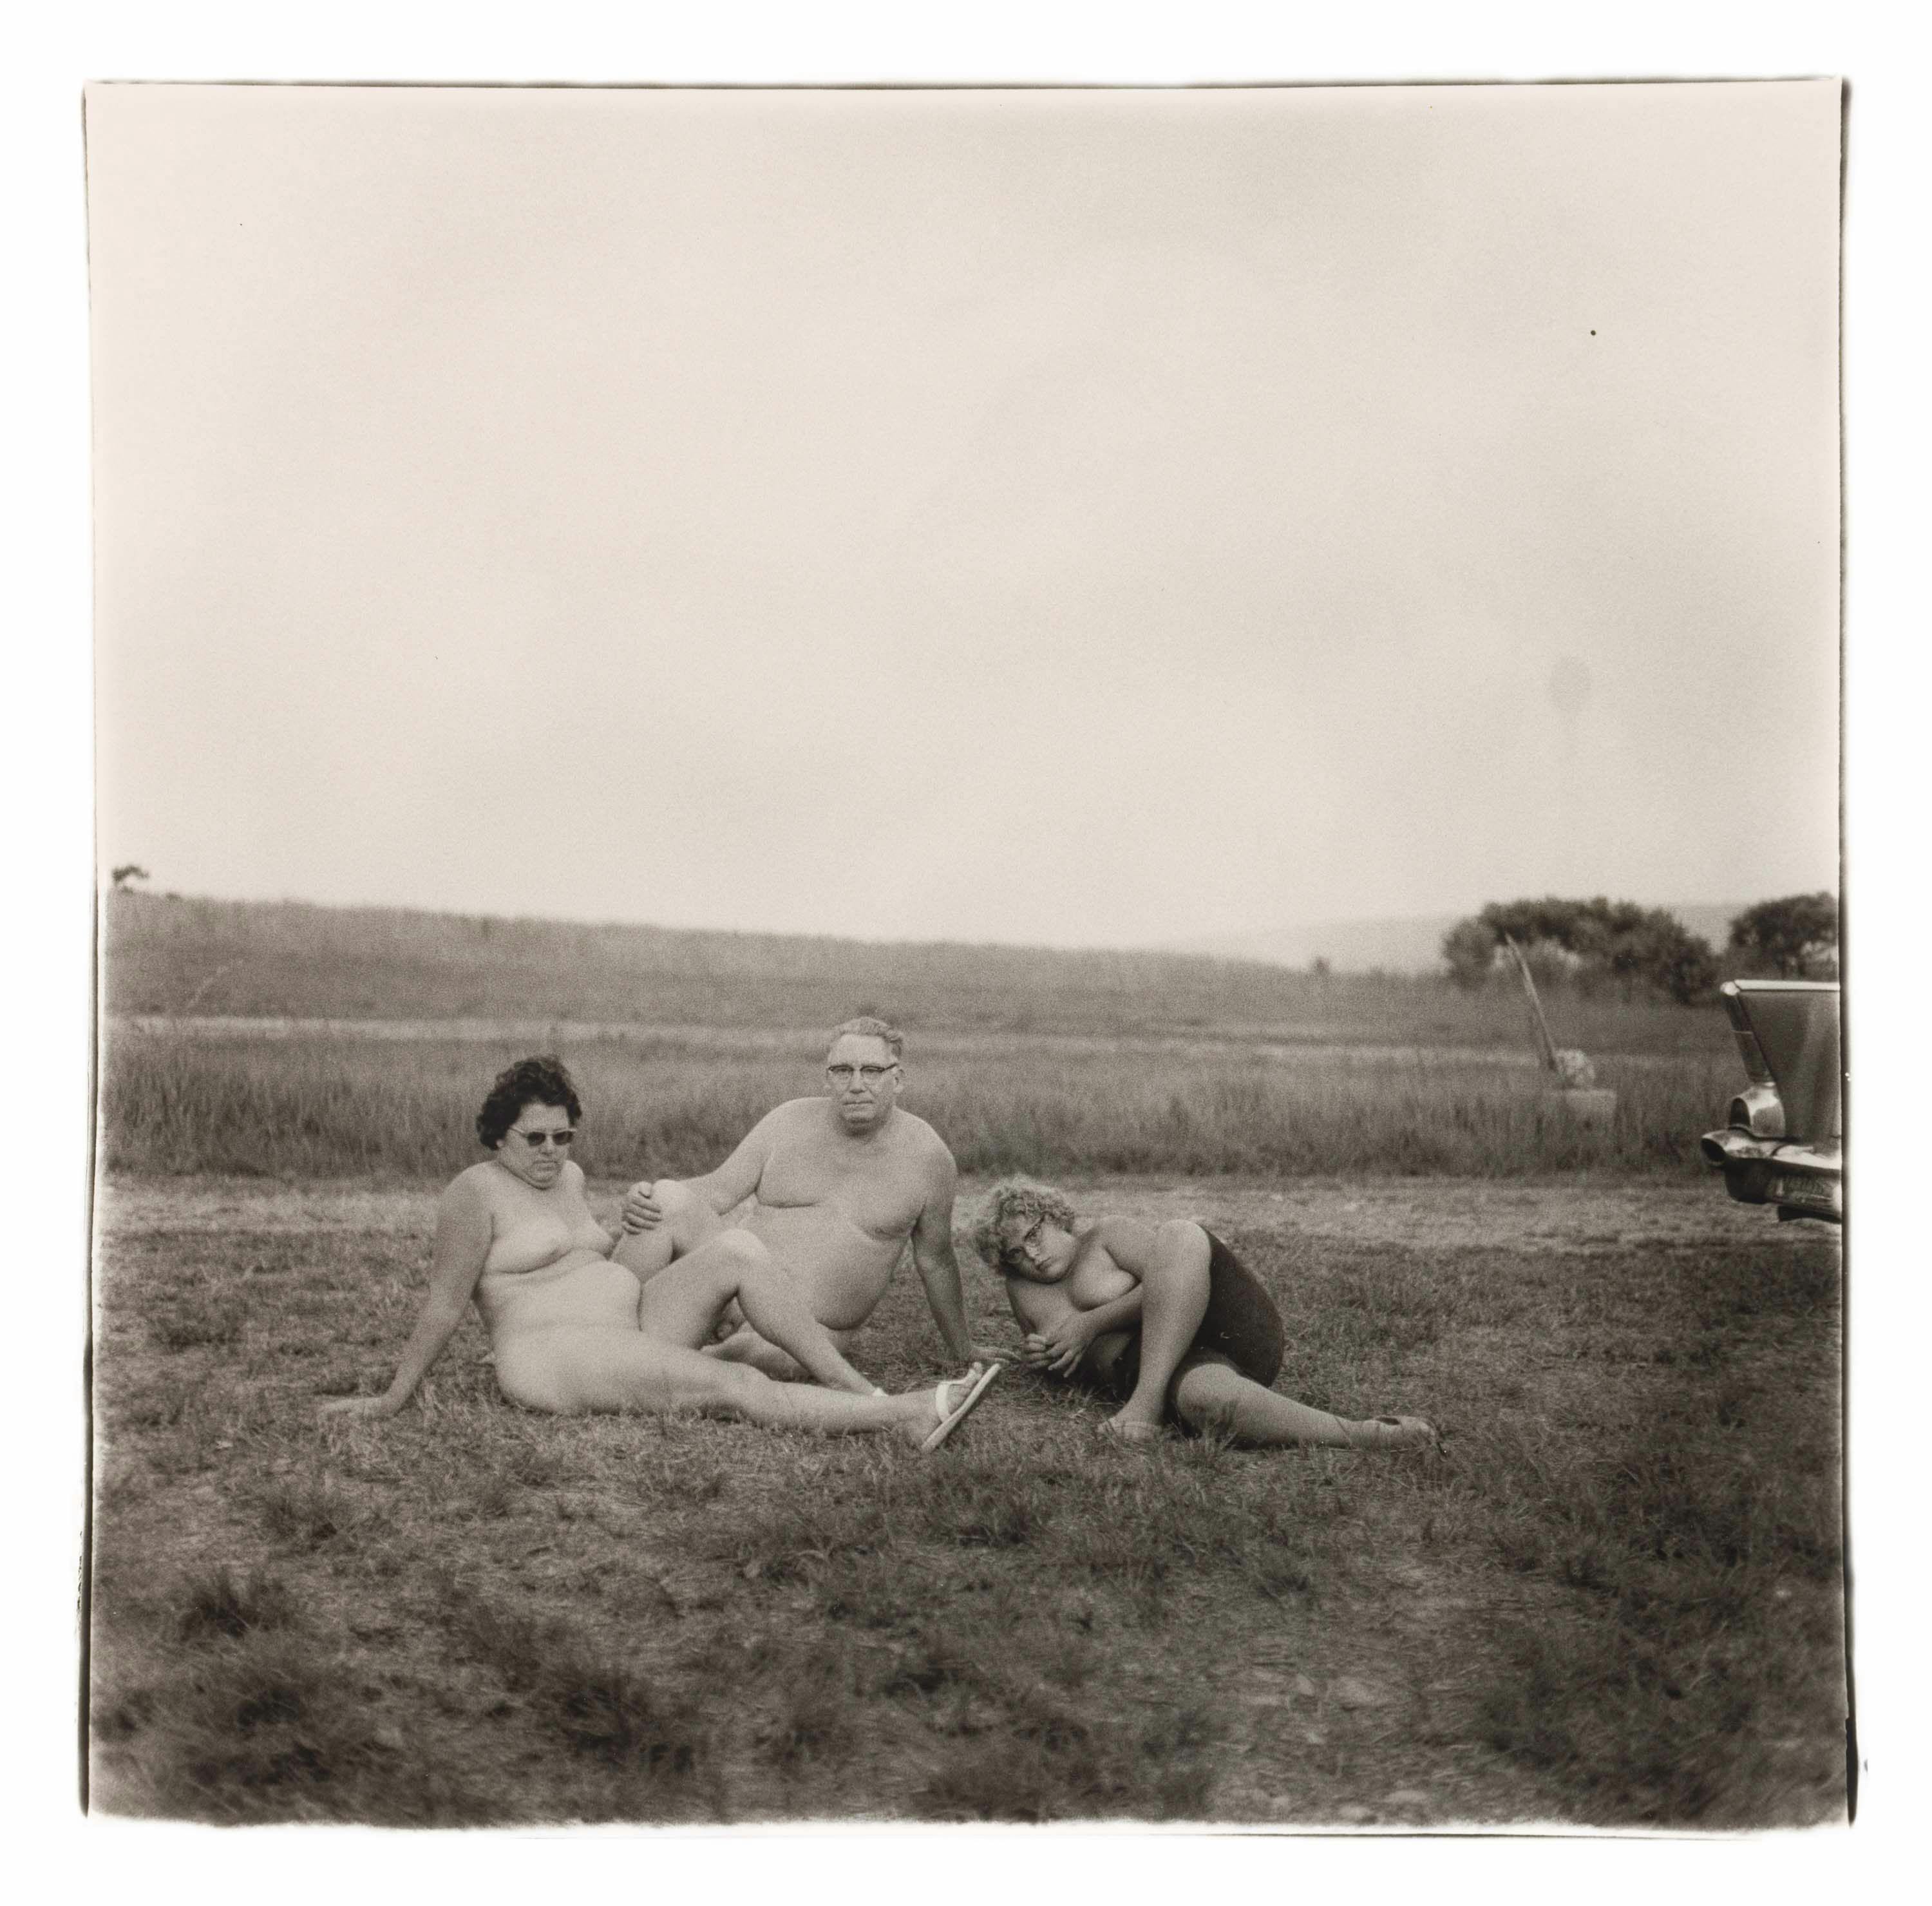 A gelatin silver print by Diane Arbus, titled A family one evening in a nudist camp, Pa. 1965, dated 1965.